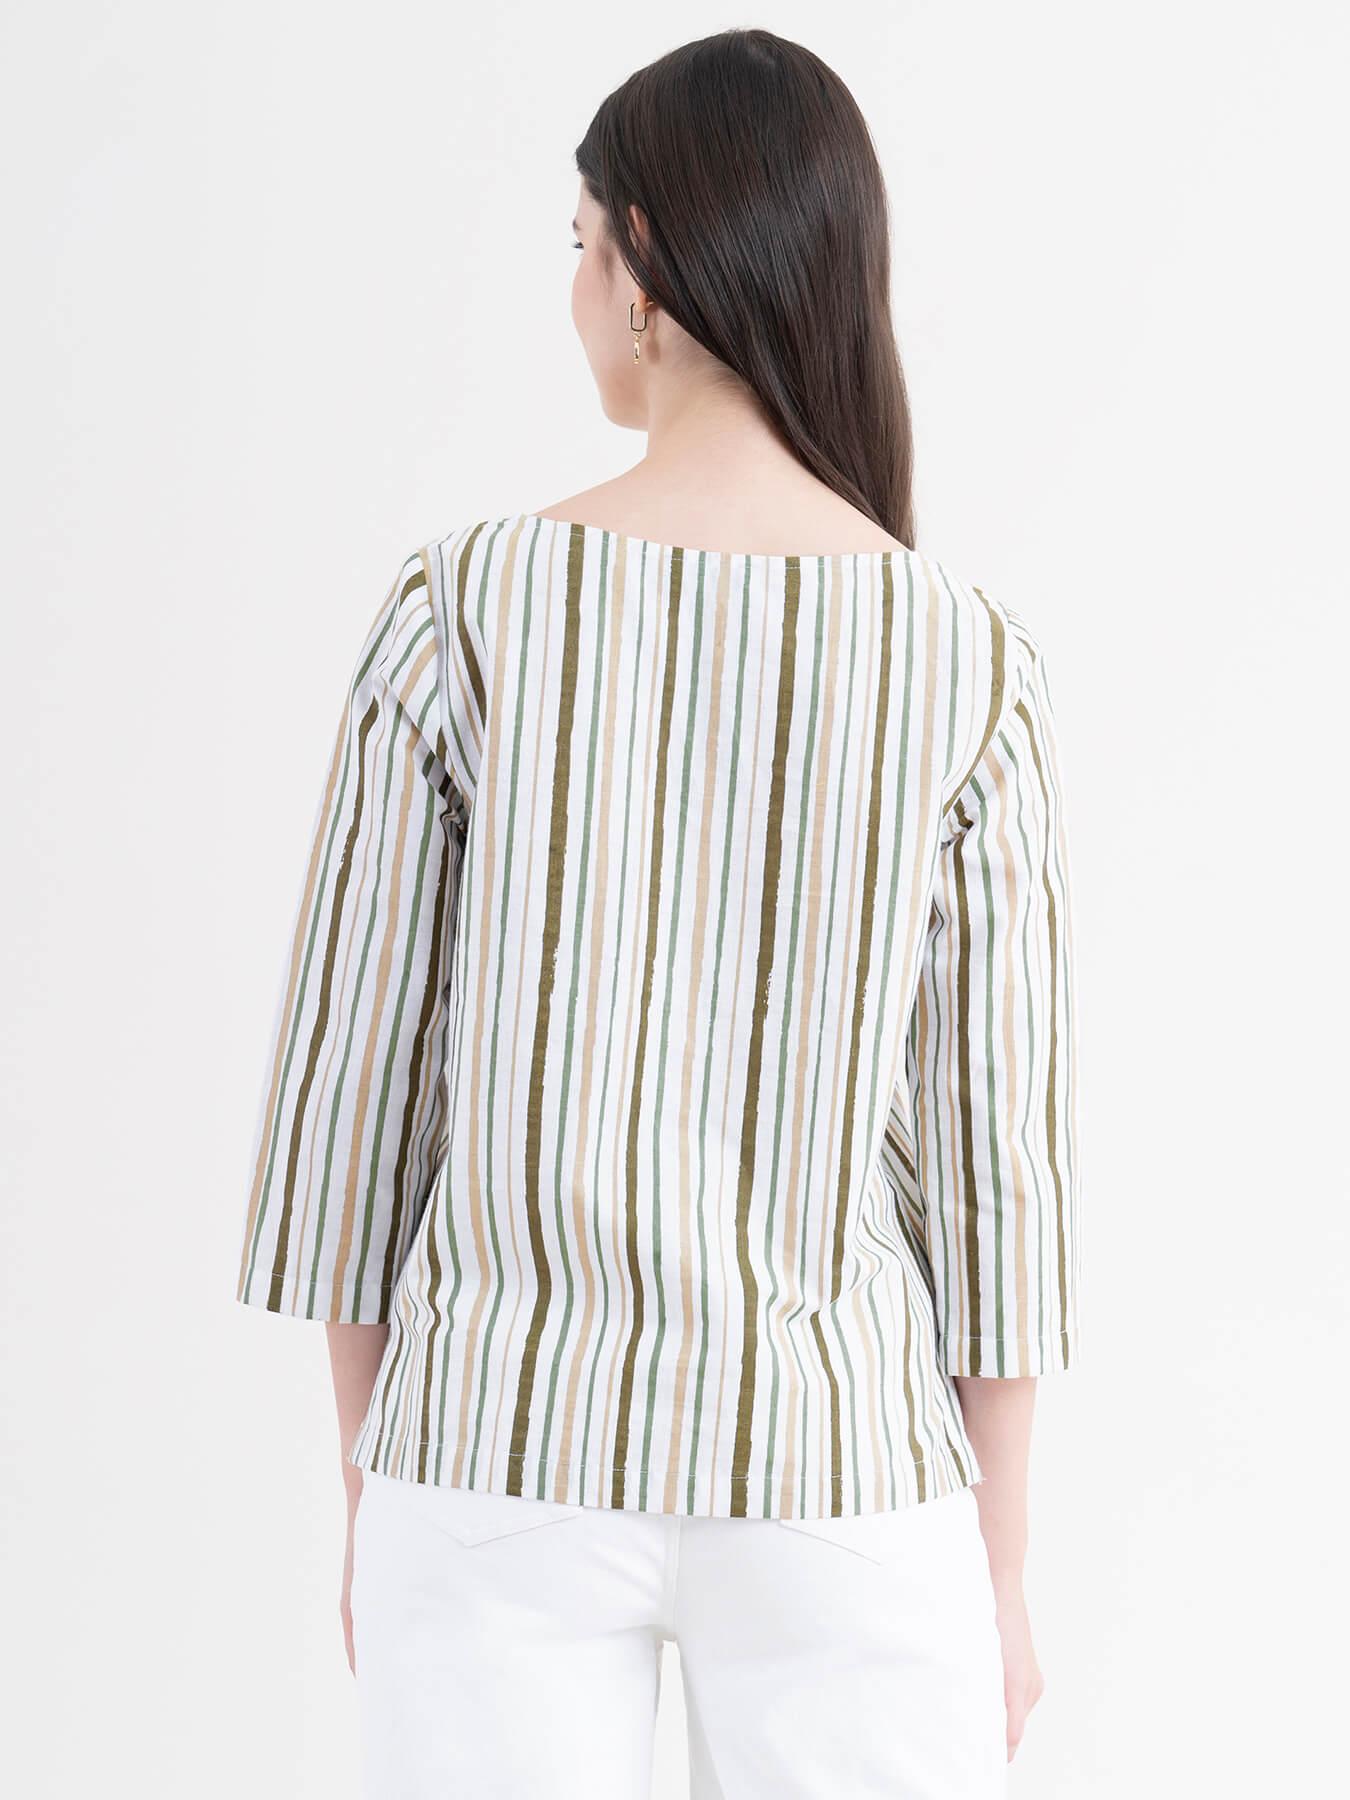 Linen Striped Top - White and Olive| Formal Tops